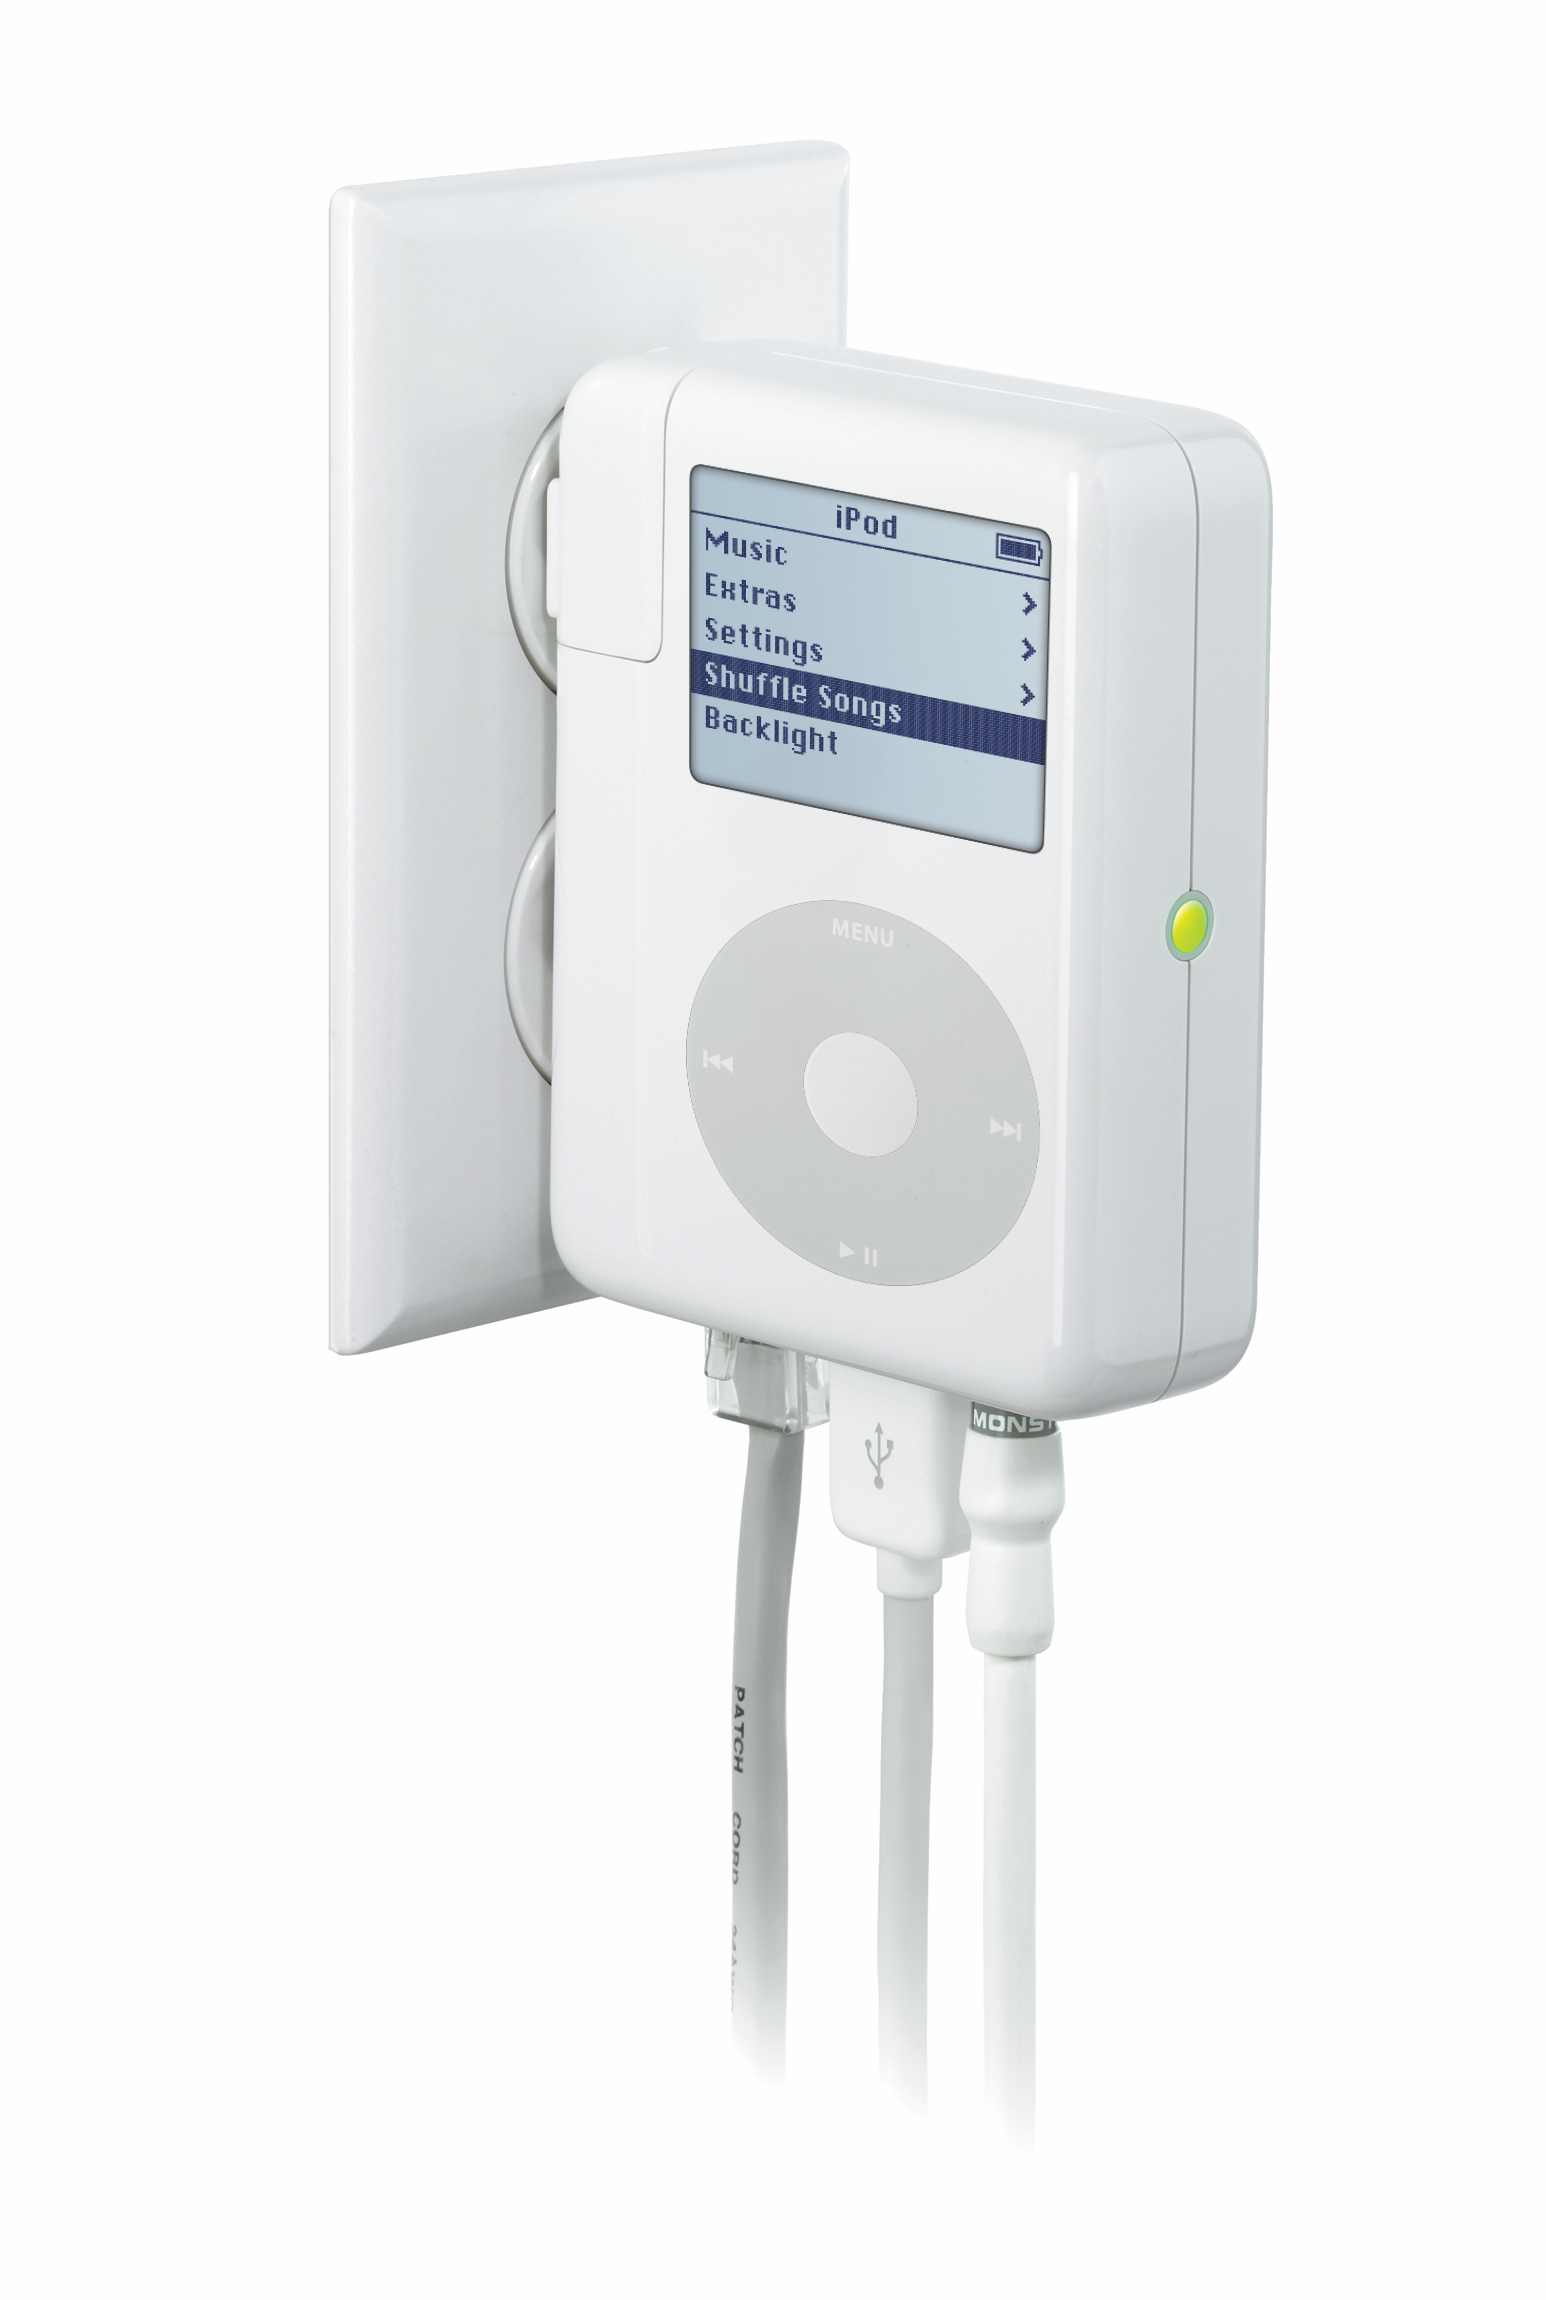 AirPod Express plugged into main power with a RJ-45, USB, and 3.5 mm mini-audio jack occupied.